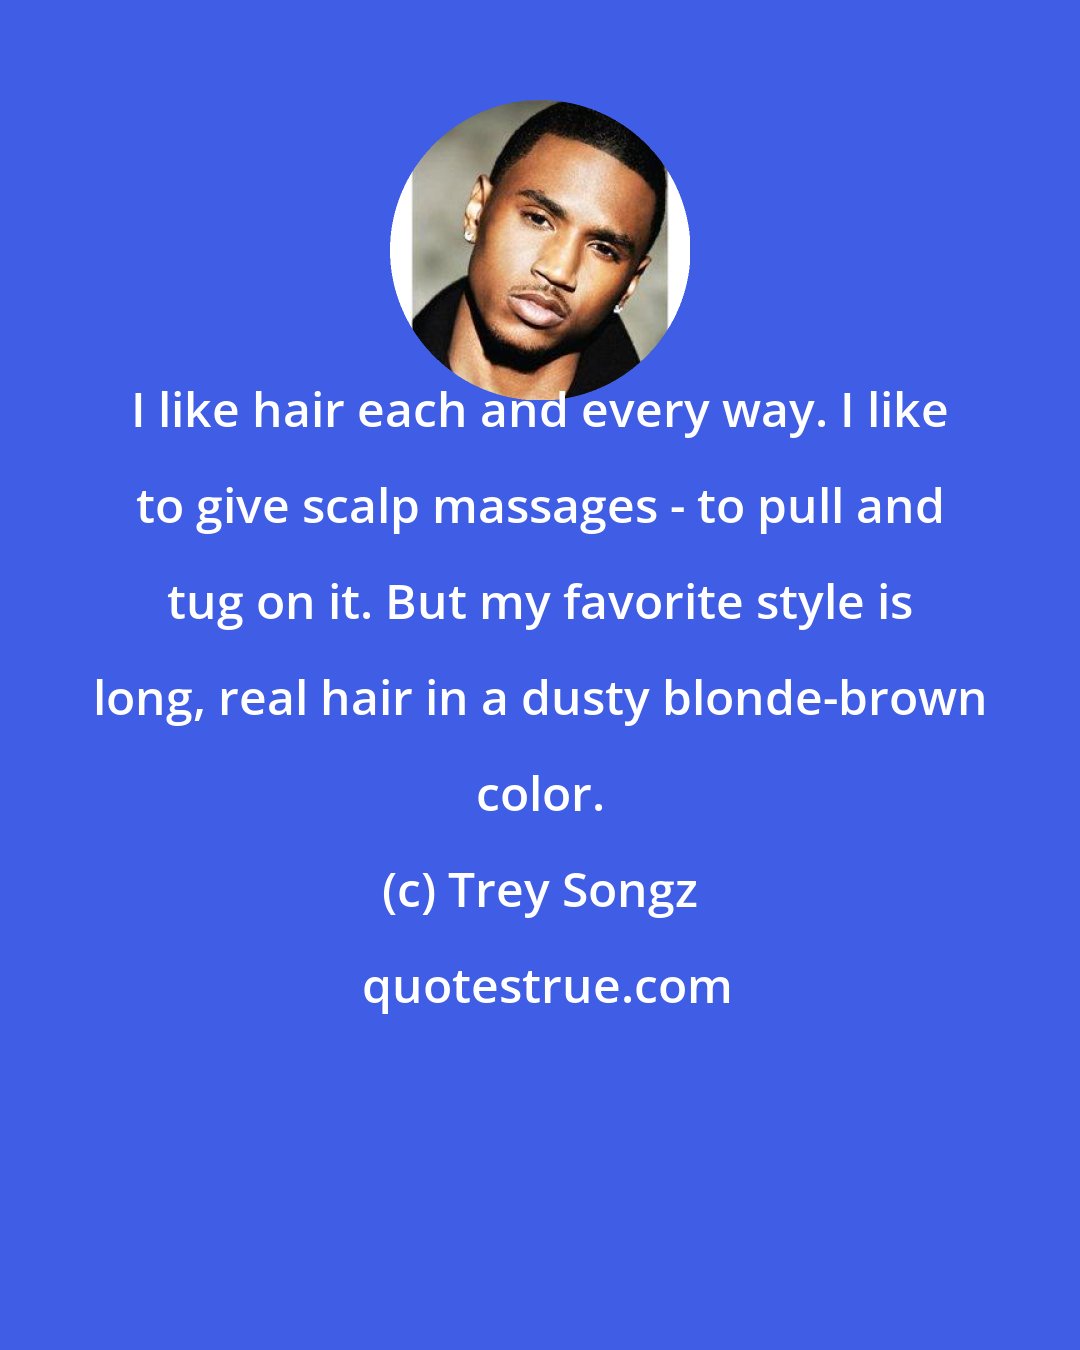 Trey Songz: I like hair each and every way. I like to give scalp massages - to pull and tug on it. But my favorite style is long, real hair in a dusty blonde-brown color.